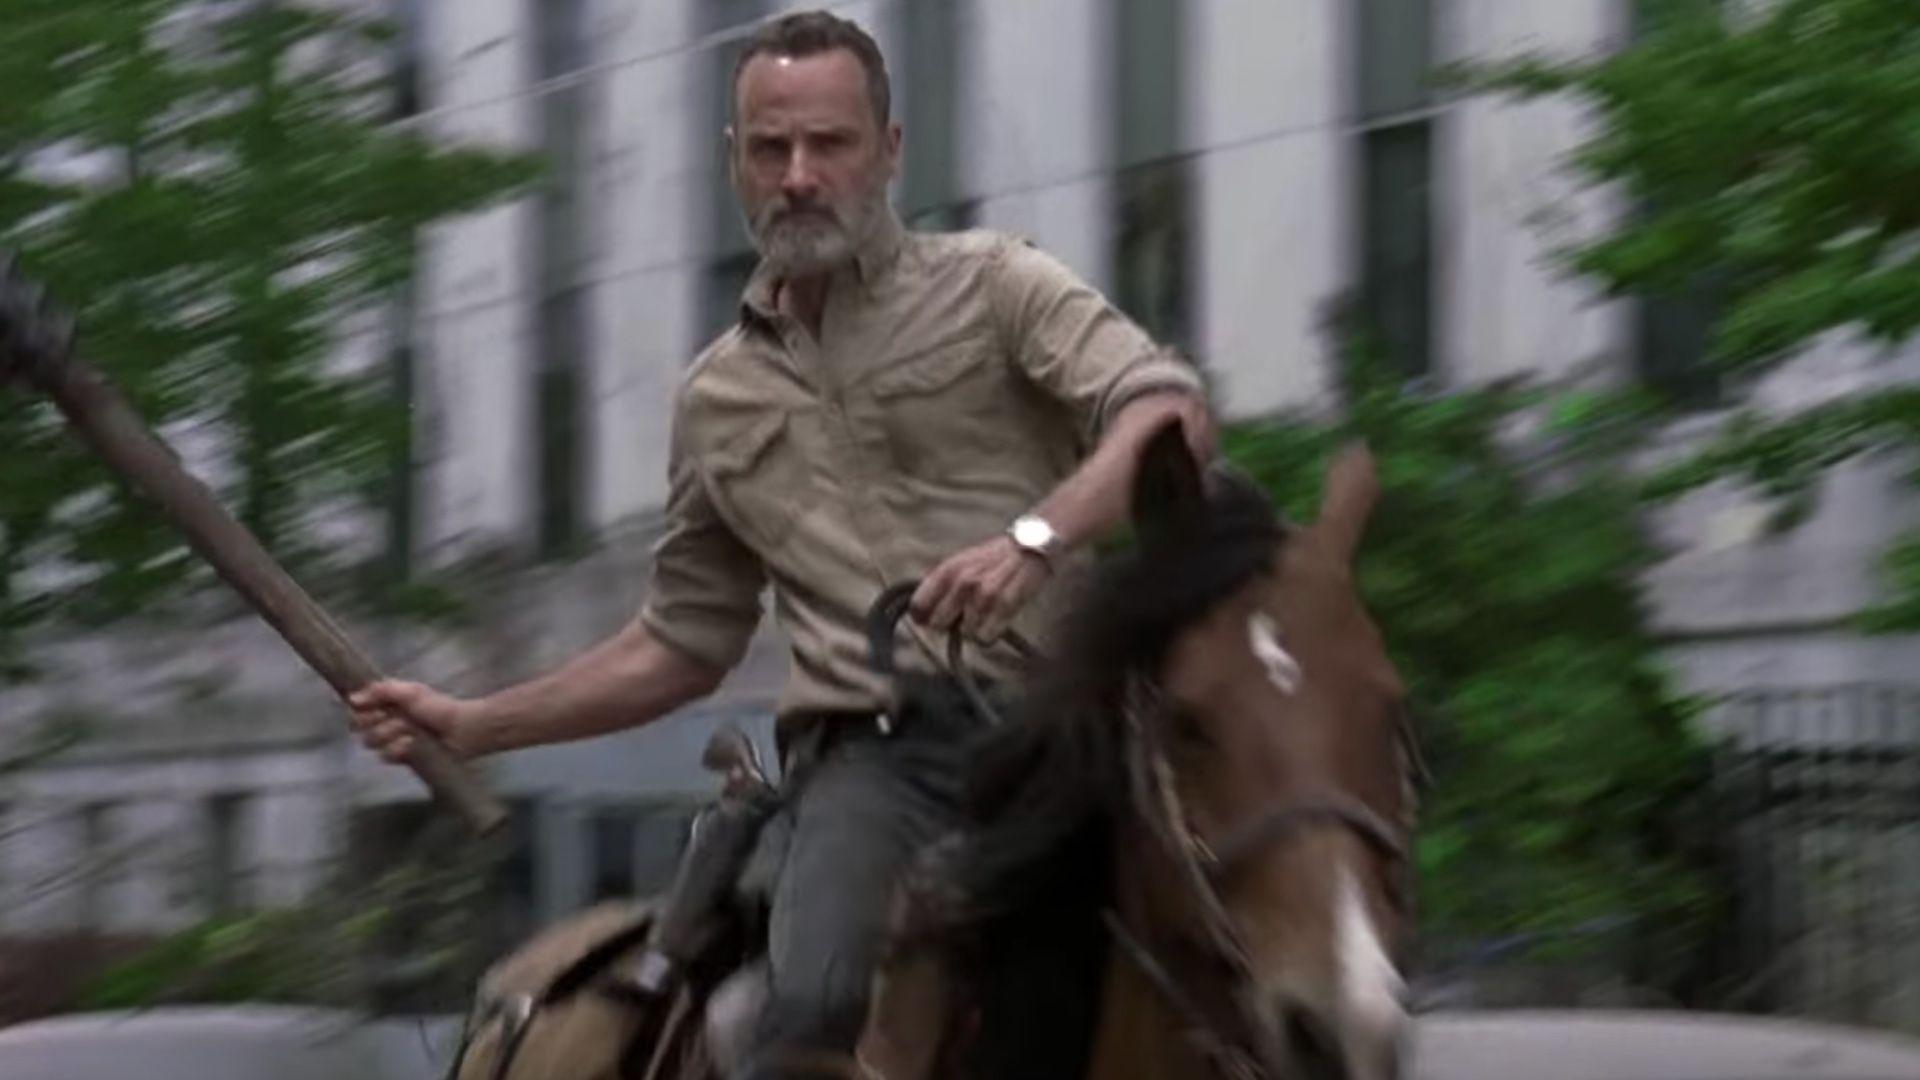 Watch The First 5 Minutes Of THE WALKING DEAD Season 9